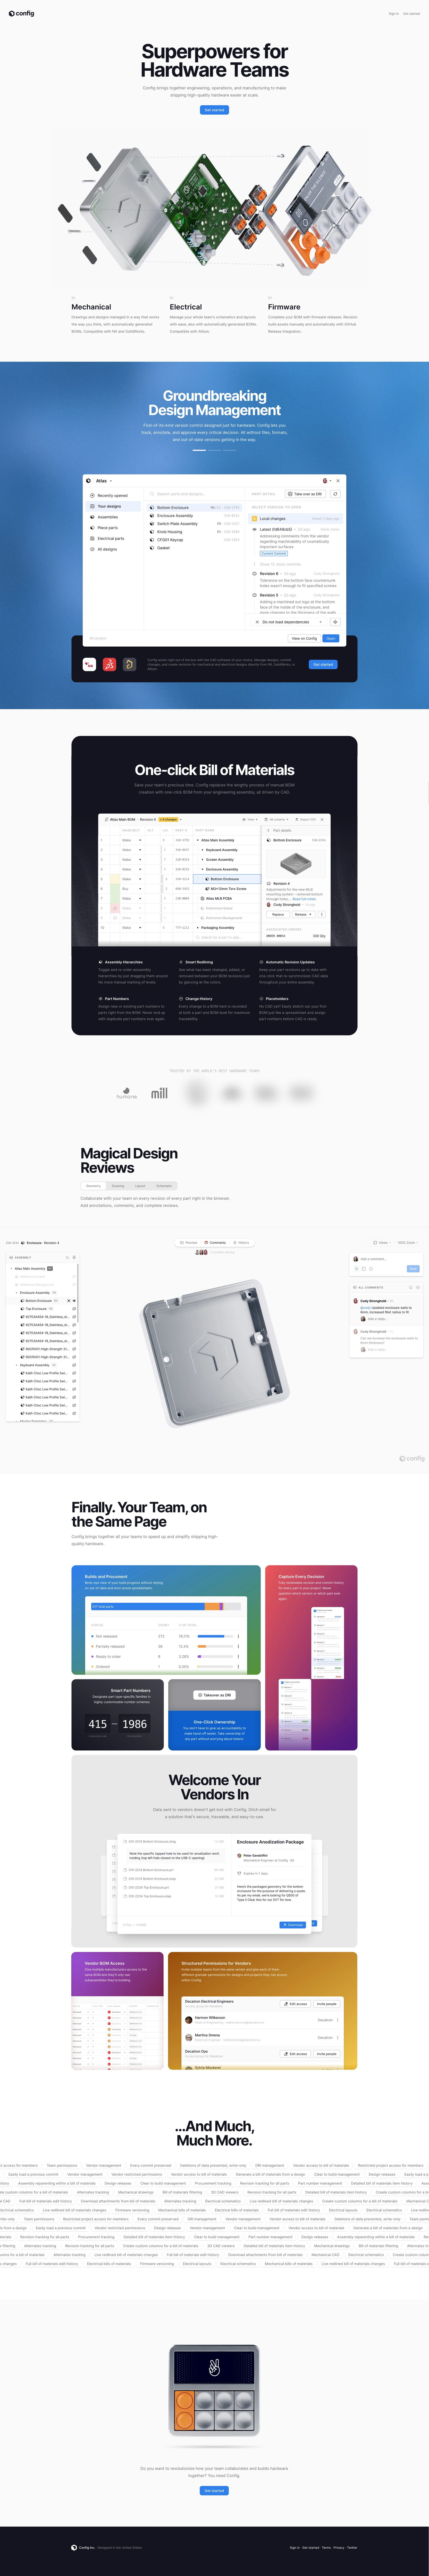 Config Landing Page Example: Config brings together engineering, operations, and manufacturing to make shipping high-quality hardware easier at scale.